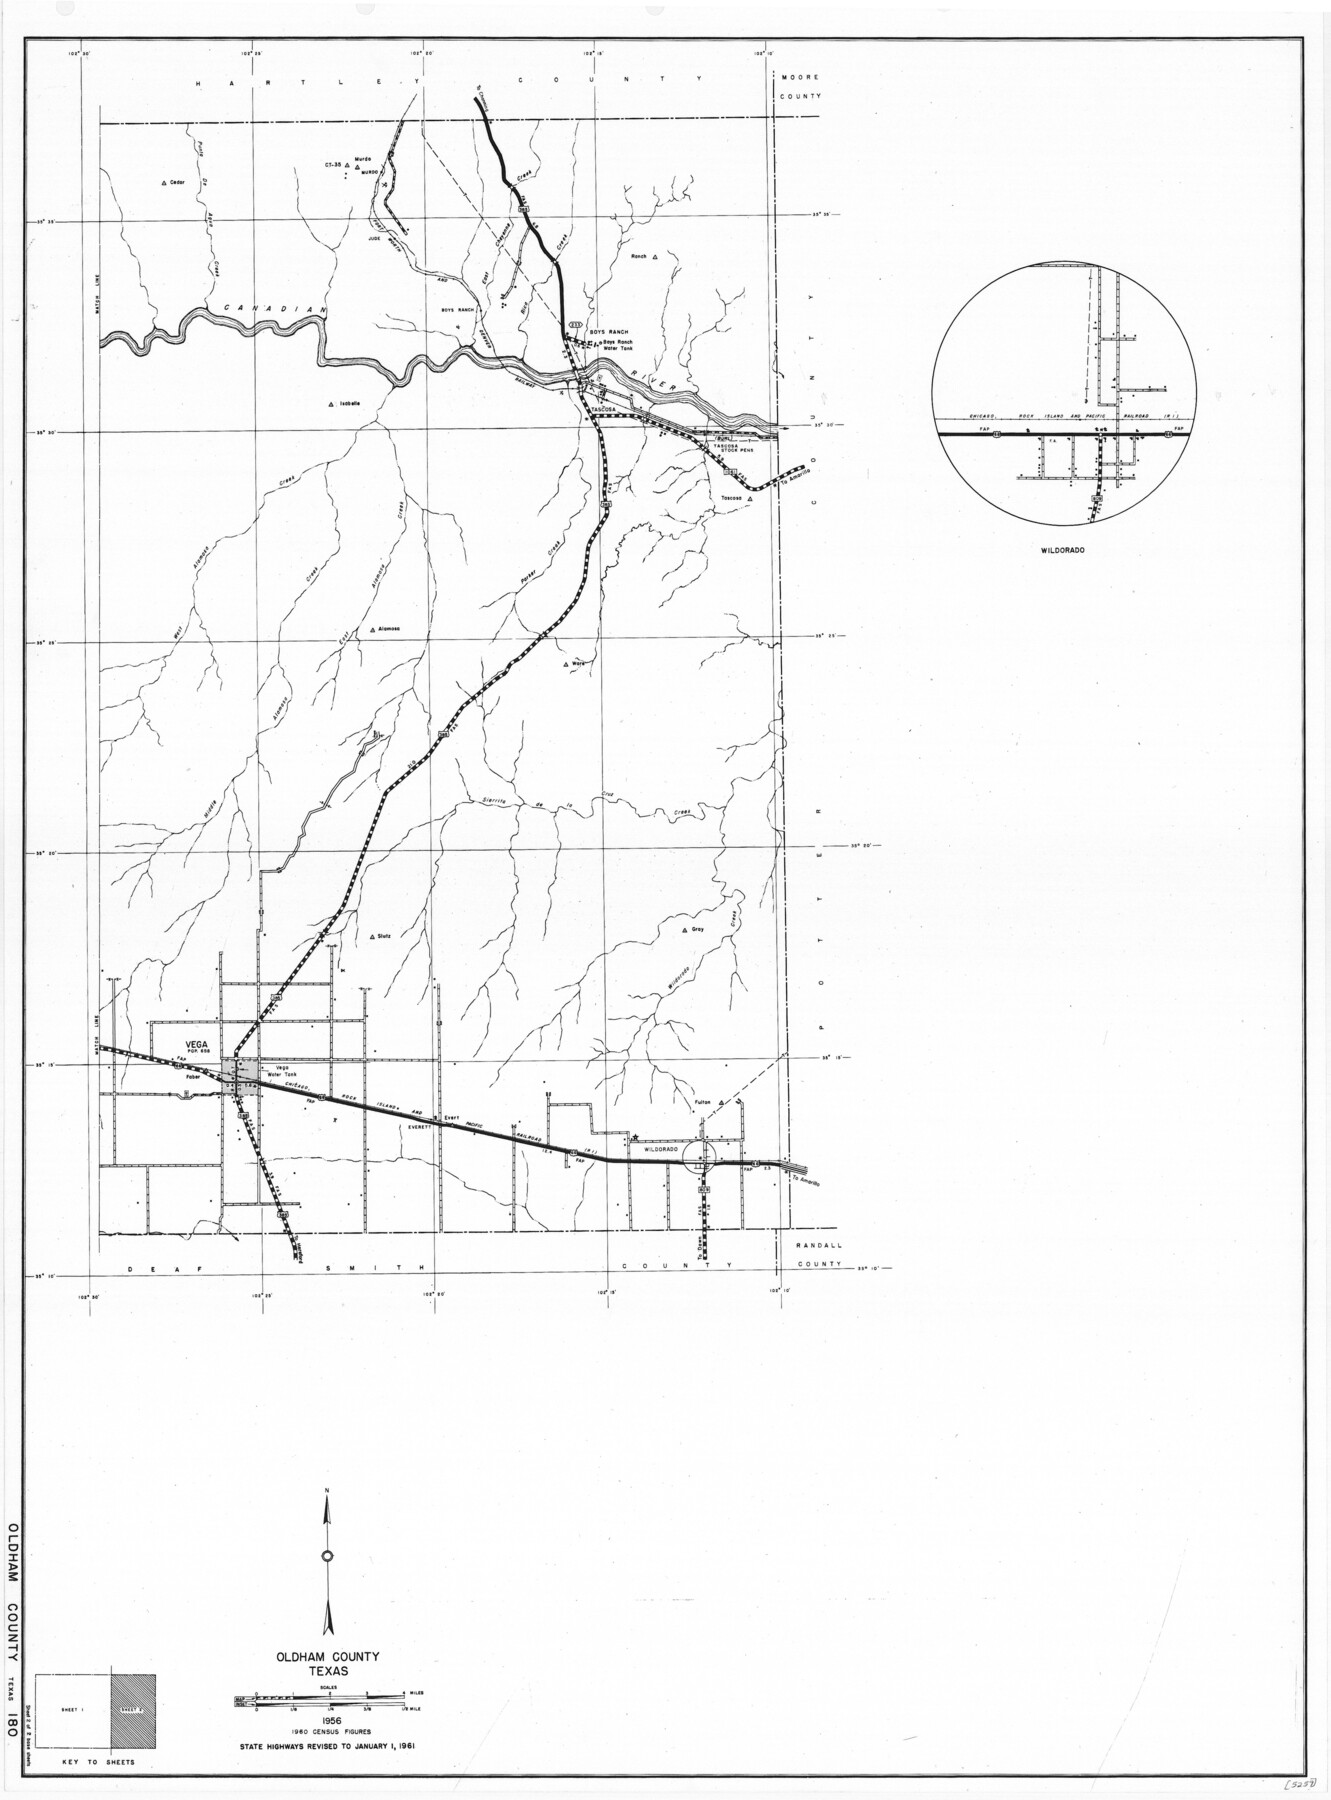 79620, General Highway Map, Oldham County, Texas, Texas State Library and Archives